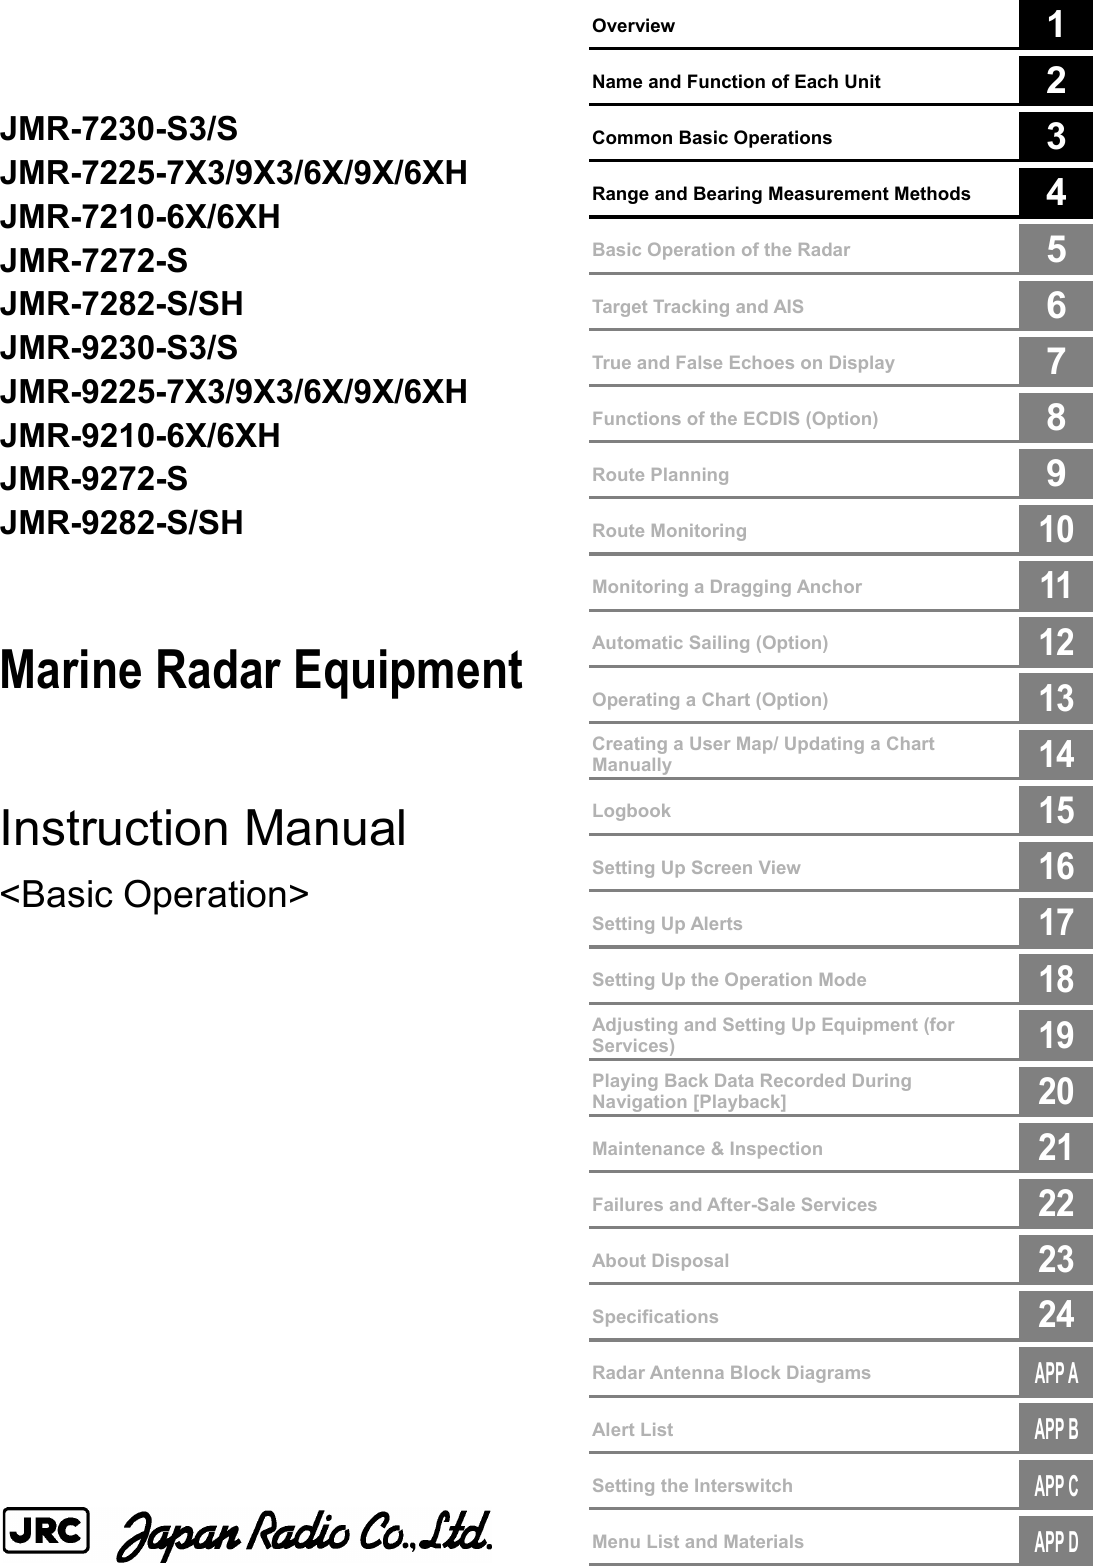        Overview  1      Name and Function of Each Unit  2      Common Basic Operations  3      Range and Bearing Measurement Methods  4        Basic Operation of the Radar  5      Target Tracking and AIS  6      True and False Echoes on Display  7        Functions of the ECDIS (Option)  8        Route Planning  9      Route Monitoring  10      Monitoring a Dragging Anchor  11      Automatic Sailing (Option)  12      Operating a Chart (Option)  13      Creating a User Map/ Updating a Chart Manually  14      Logbook  15      Setting Up Screen View  16      Setting Up Alerts  17      Setting Up the Operation Mode  18      Adjusting and Setting Up Equipment (for Services)  19      Playing Back Data Recorded During Navigation [Playback]  20        Maintenance &amp; Inspection  21        Failures and After-Sale Services  22        About Disposal  23        Specifications  24         Radar Antenna Block Diagrams  APP A       Alert List  APP B       Setting the Interswitch  APP C       Menu List and Materials  APP D      JMR-7230-S3/S JMR-7225-7X3/9X3/6X/9X/6XH JMR-7210-6X/6XH JMR-7272-S JMR-7282-S/SH JMR-9230-S3/S JMR-9225-7X3/9X3/6X/9X/6XH JMR-9210-6X/6XH JMR-9272-S JMR-9282-S/SH   Marine Radar Equipment   Instruction Manual  &lt;Basic Operation&gt;                     